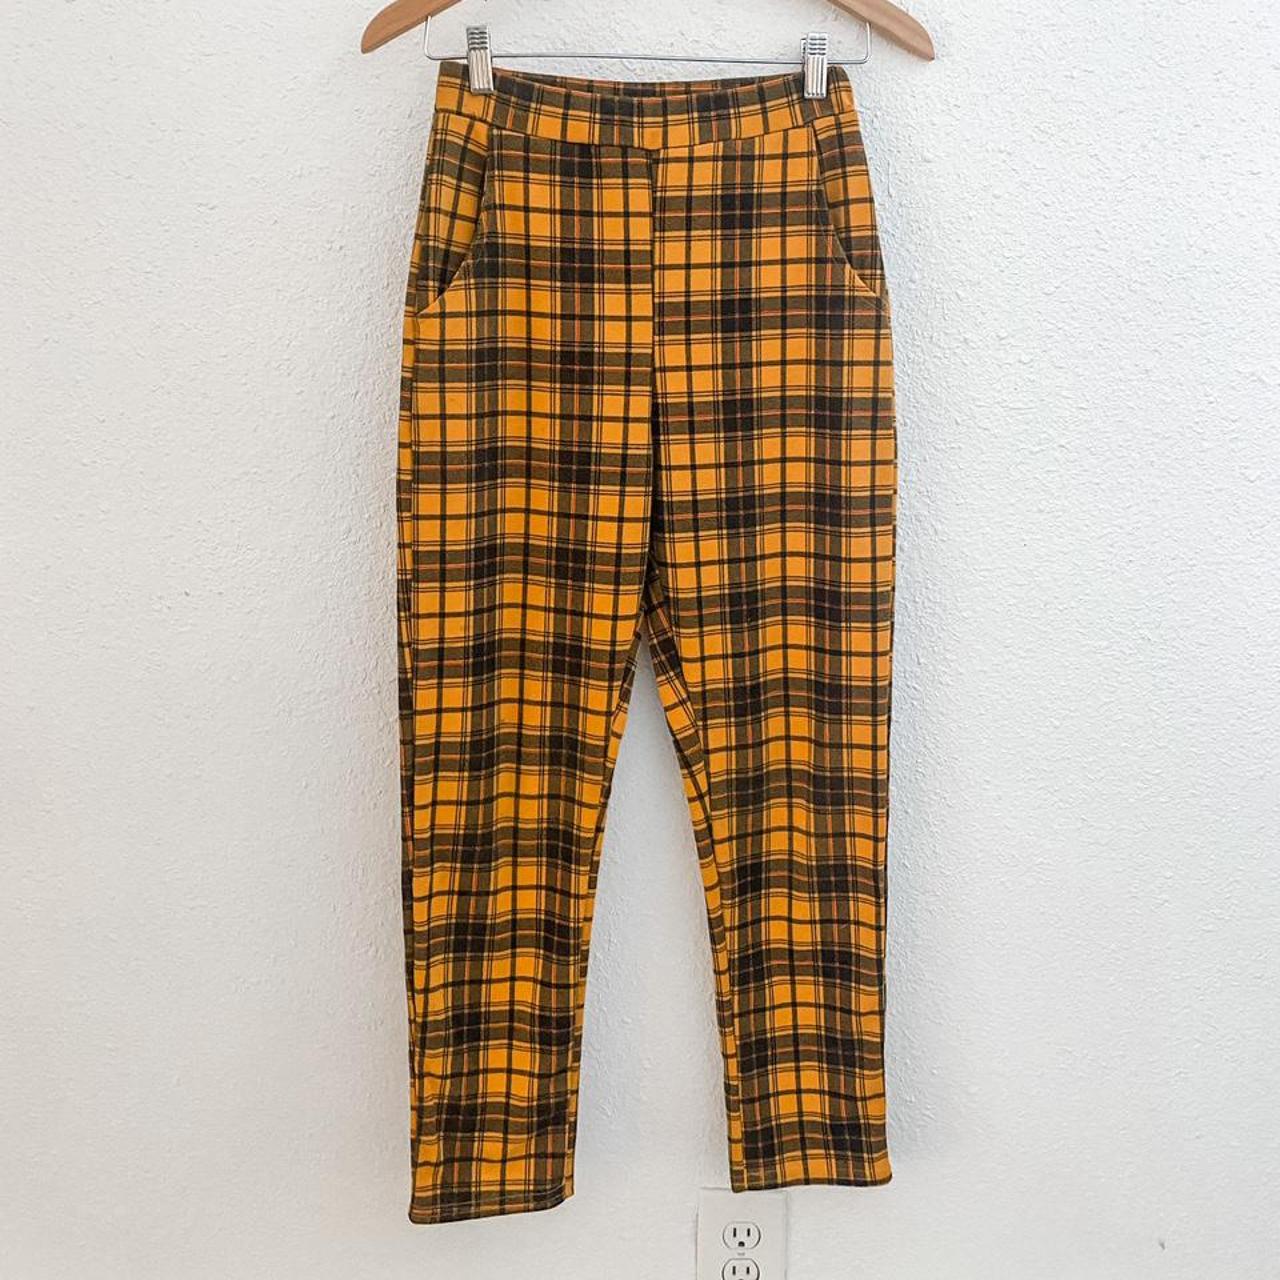 Yellow Plaid Pants // Size US 2, very stretchy //... - Depop